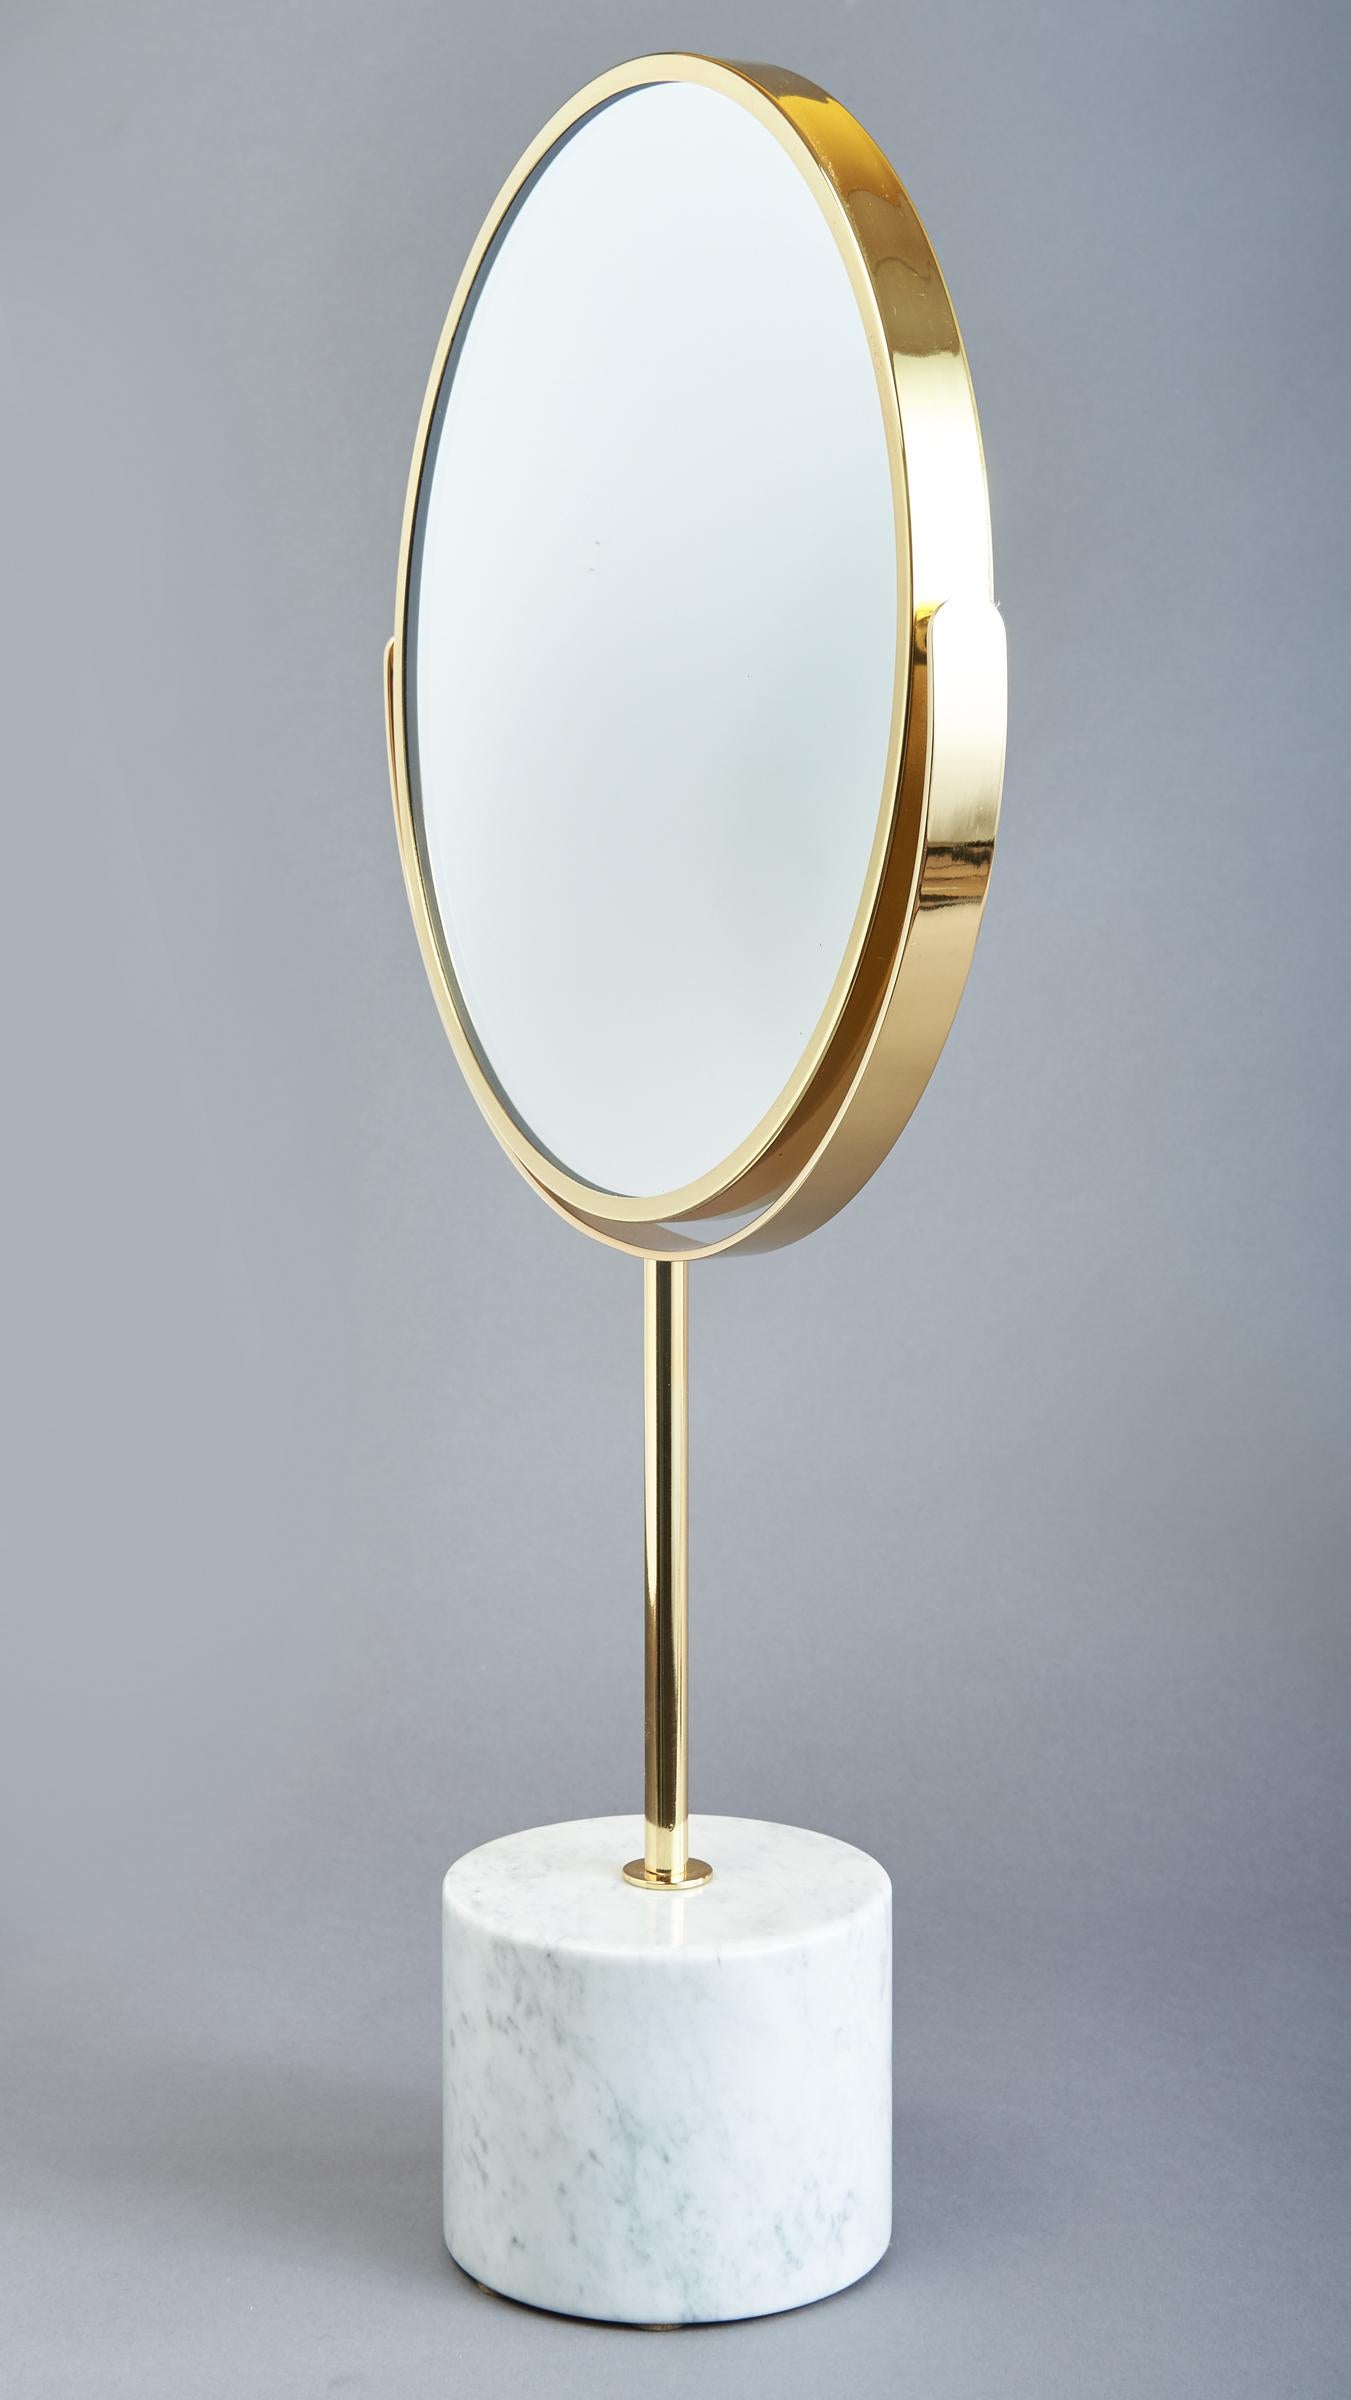 Mid-20th Century Modernist Adjustable Table Mirror, Italy, 1950's For Sale